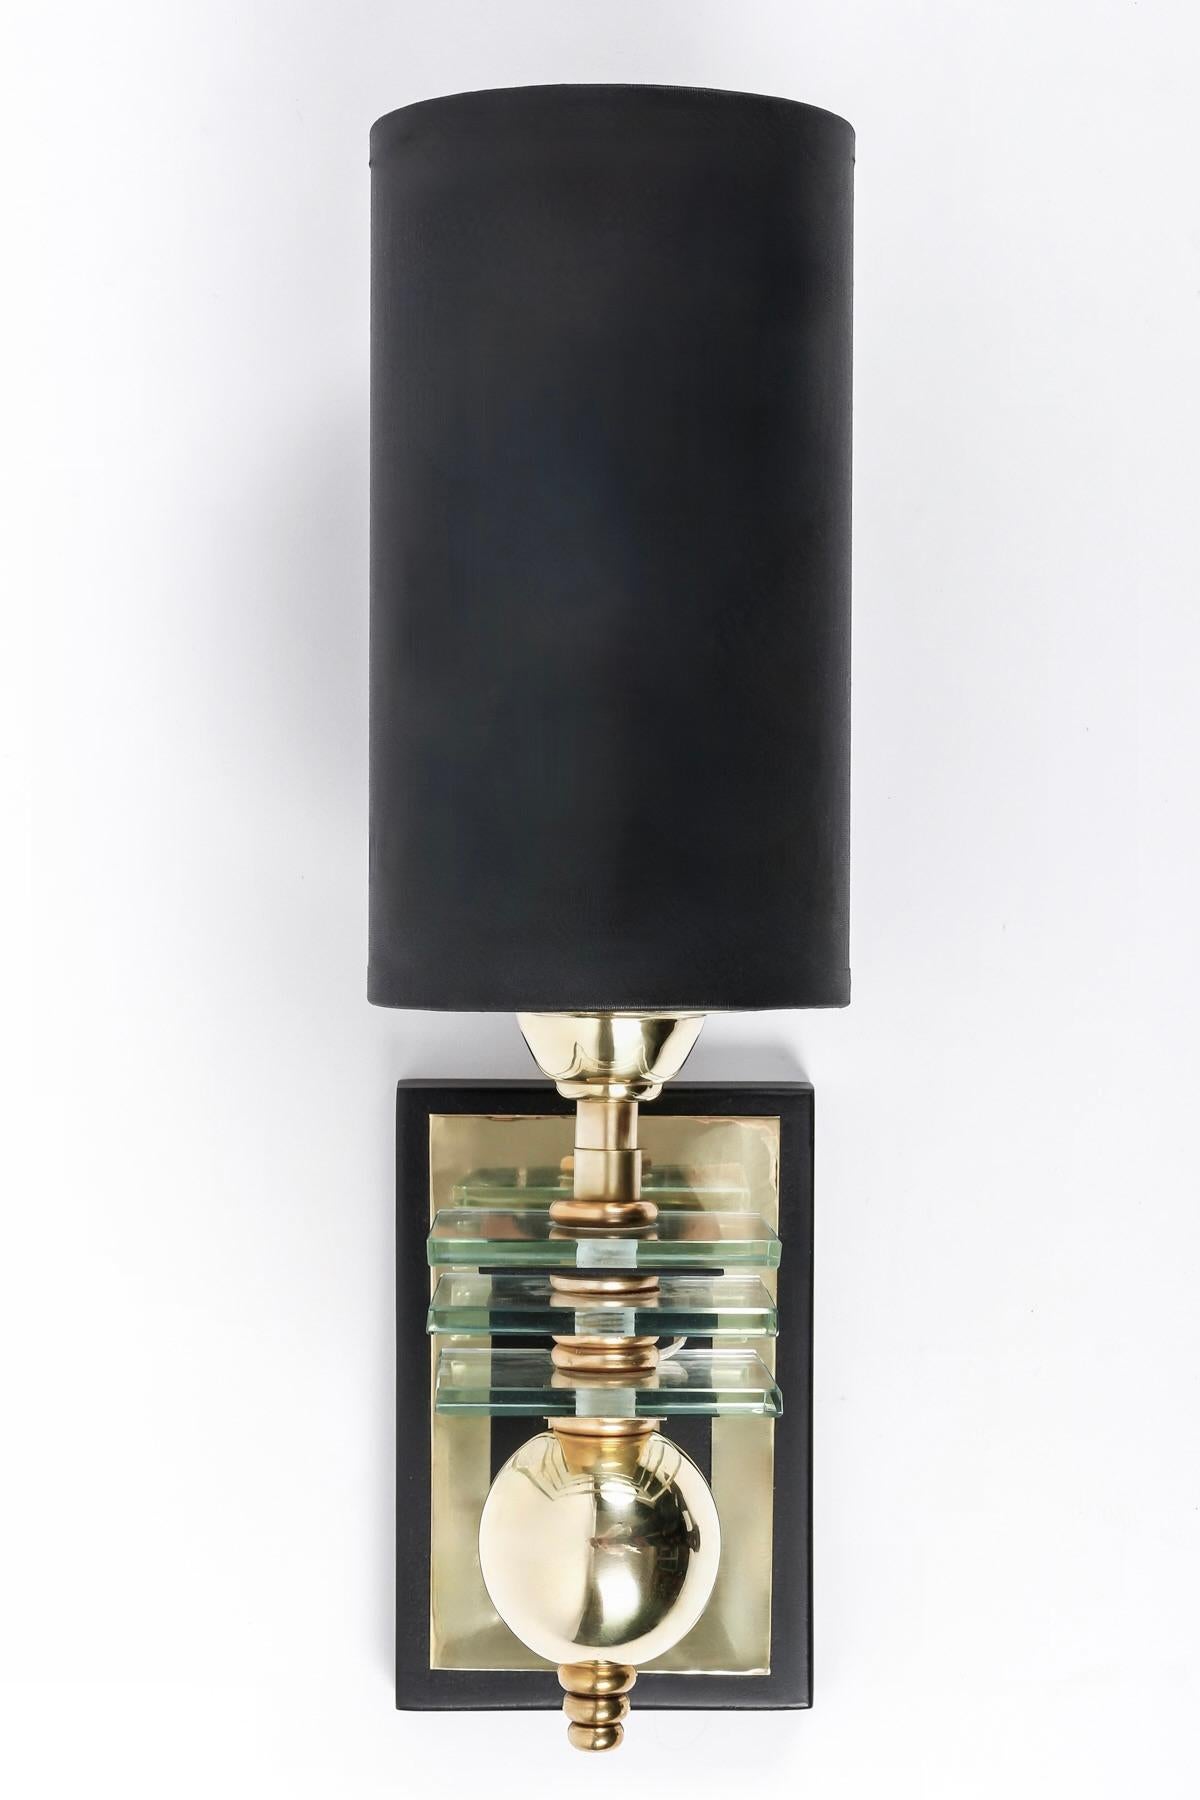 The wall base is composed of a black rectangle embellished with a gilded brass rectangle on which rests the light arm decorated with three glass plates and highlighted with brass balls on the lower part.
On the upper part, the sconce is dressed with